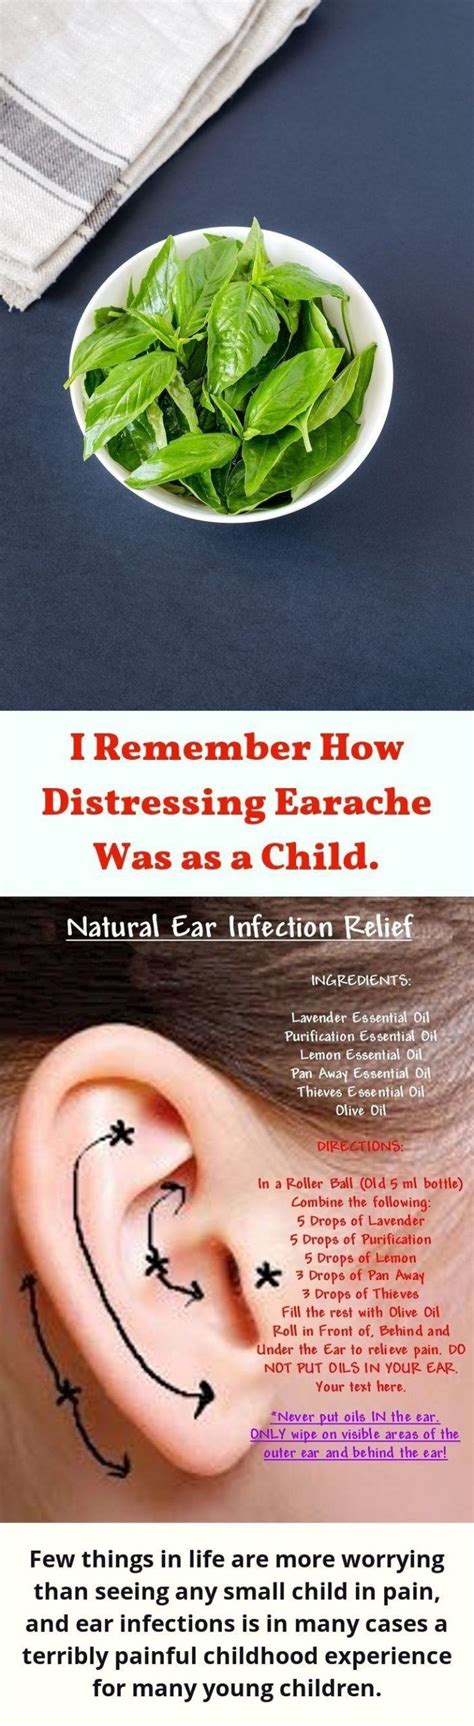 It Is Good To Know That Simple Earaches May Be Remedied Easily In Your